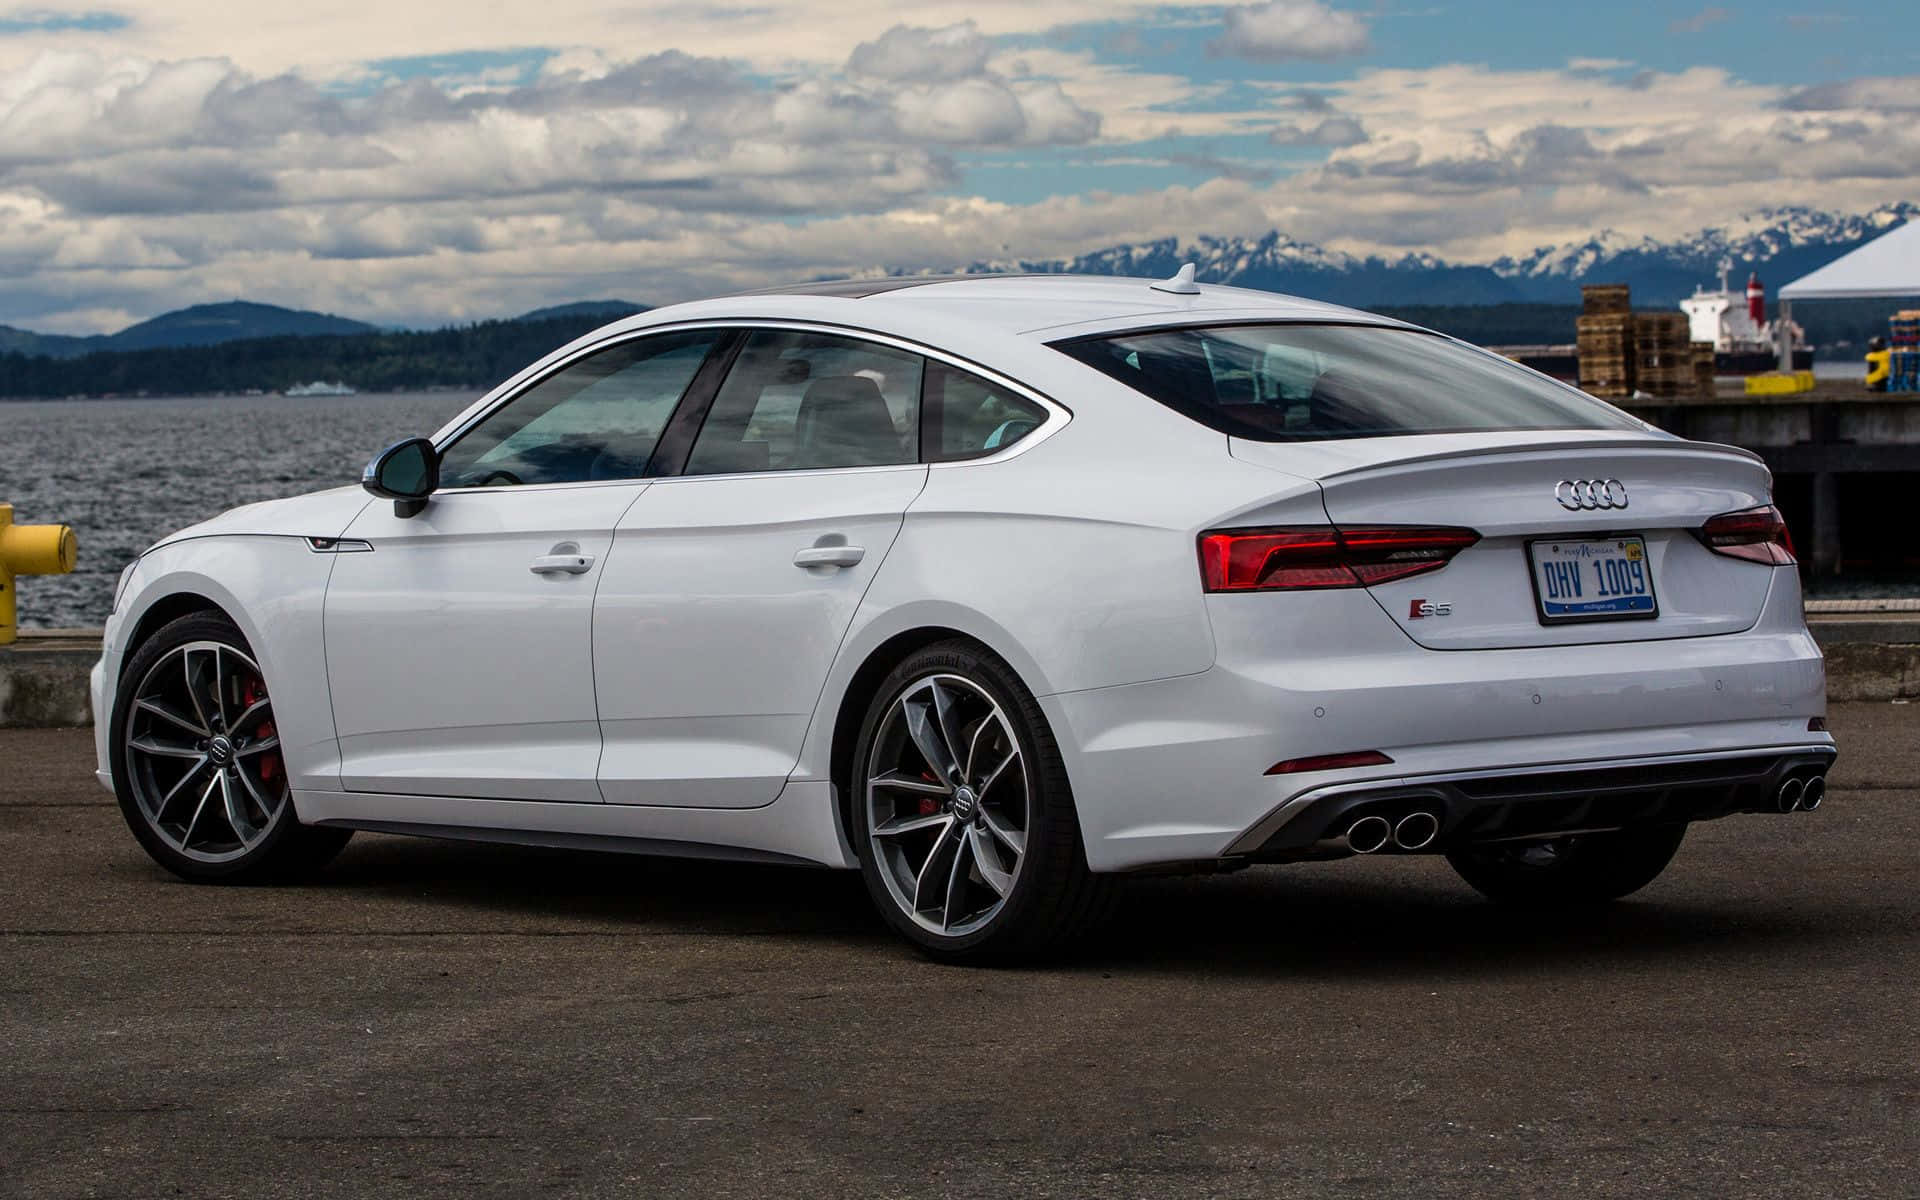 Sleek and Powerful Audi S5 in a Stunning Landscape Wallpaper